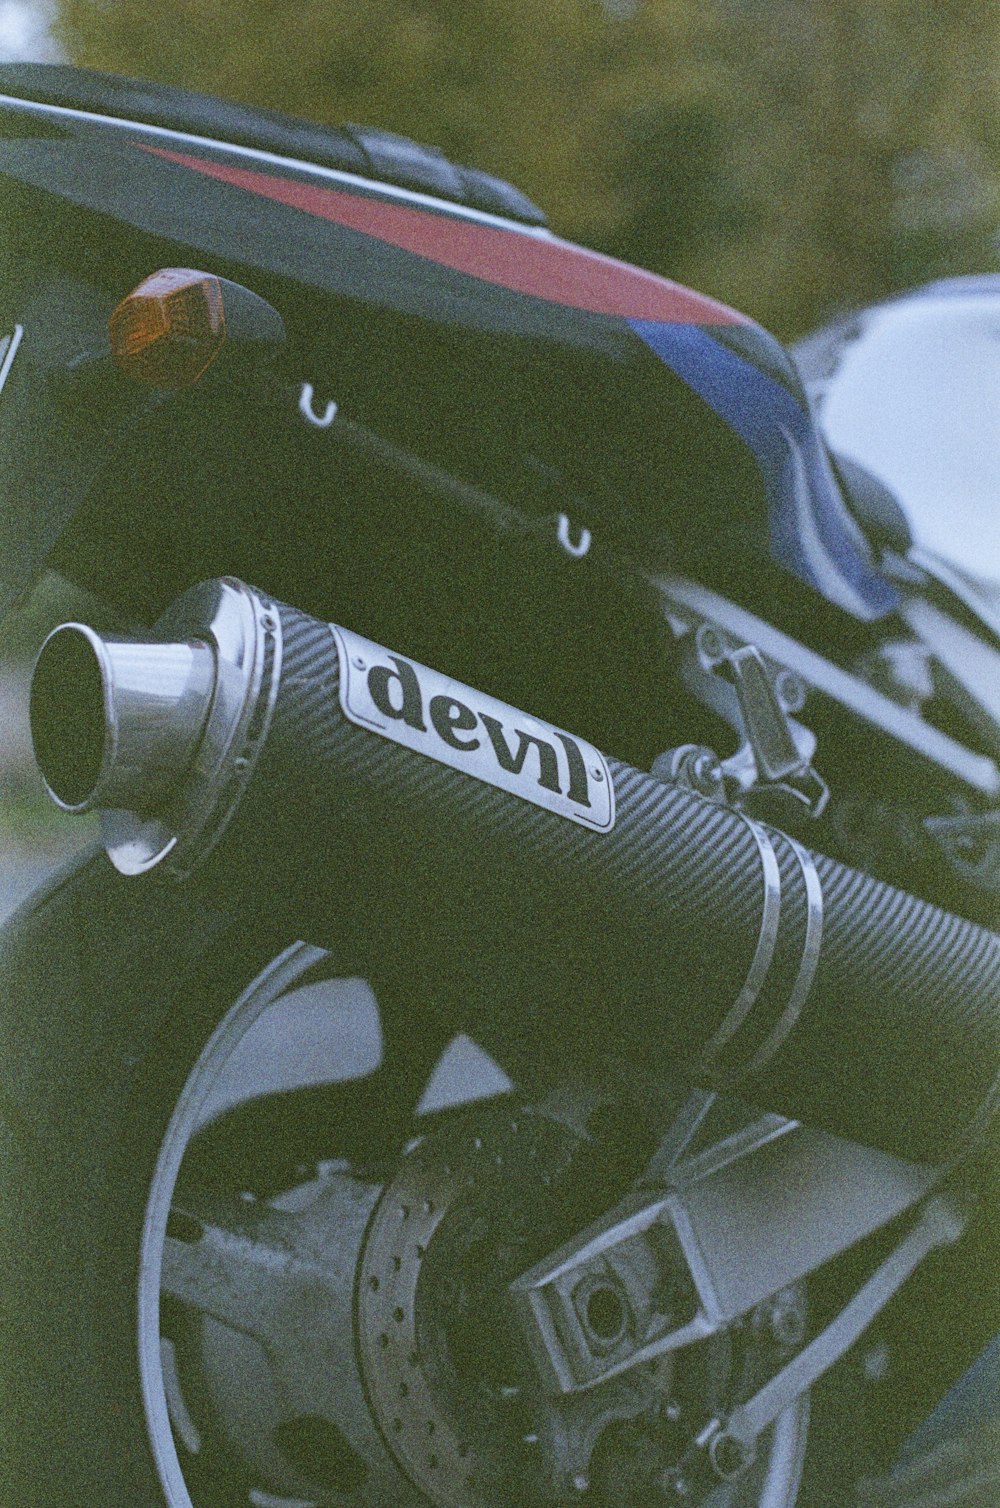 a close up of a motorcycle's exhaust system